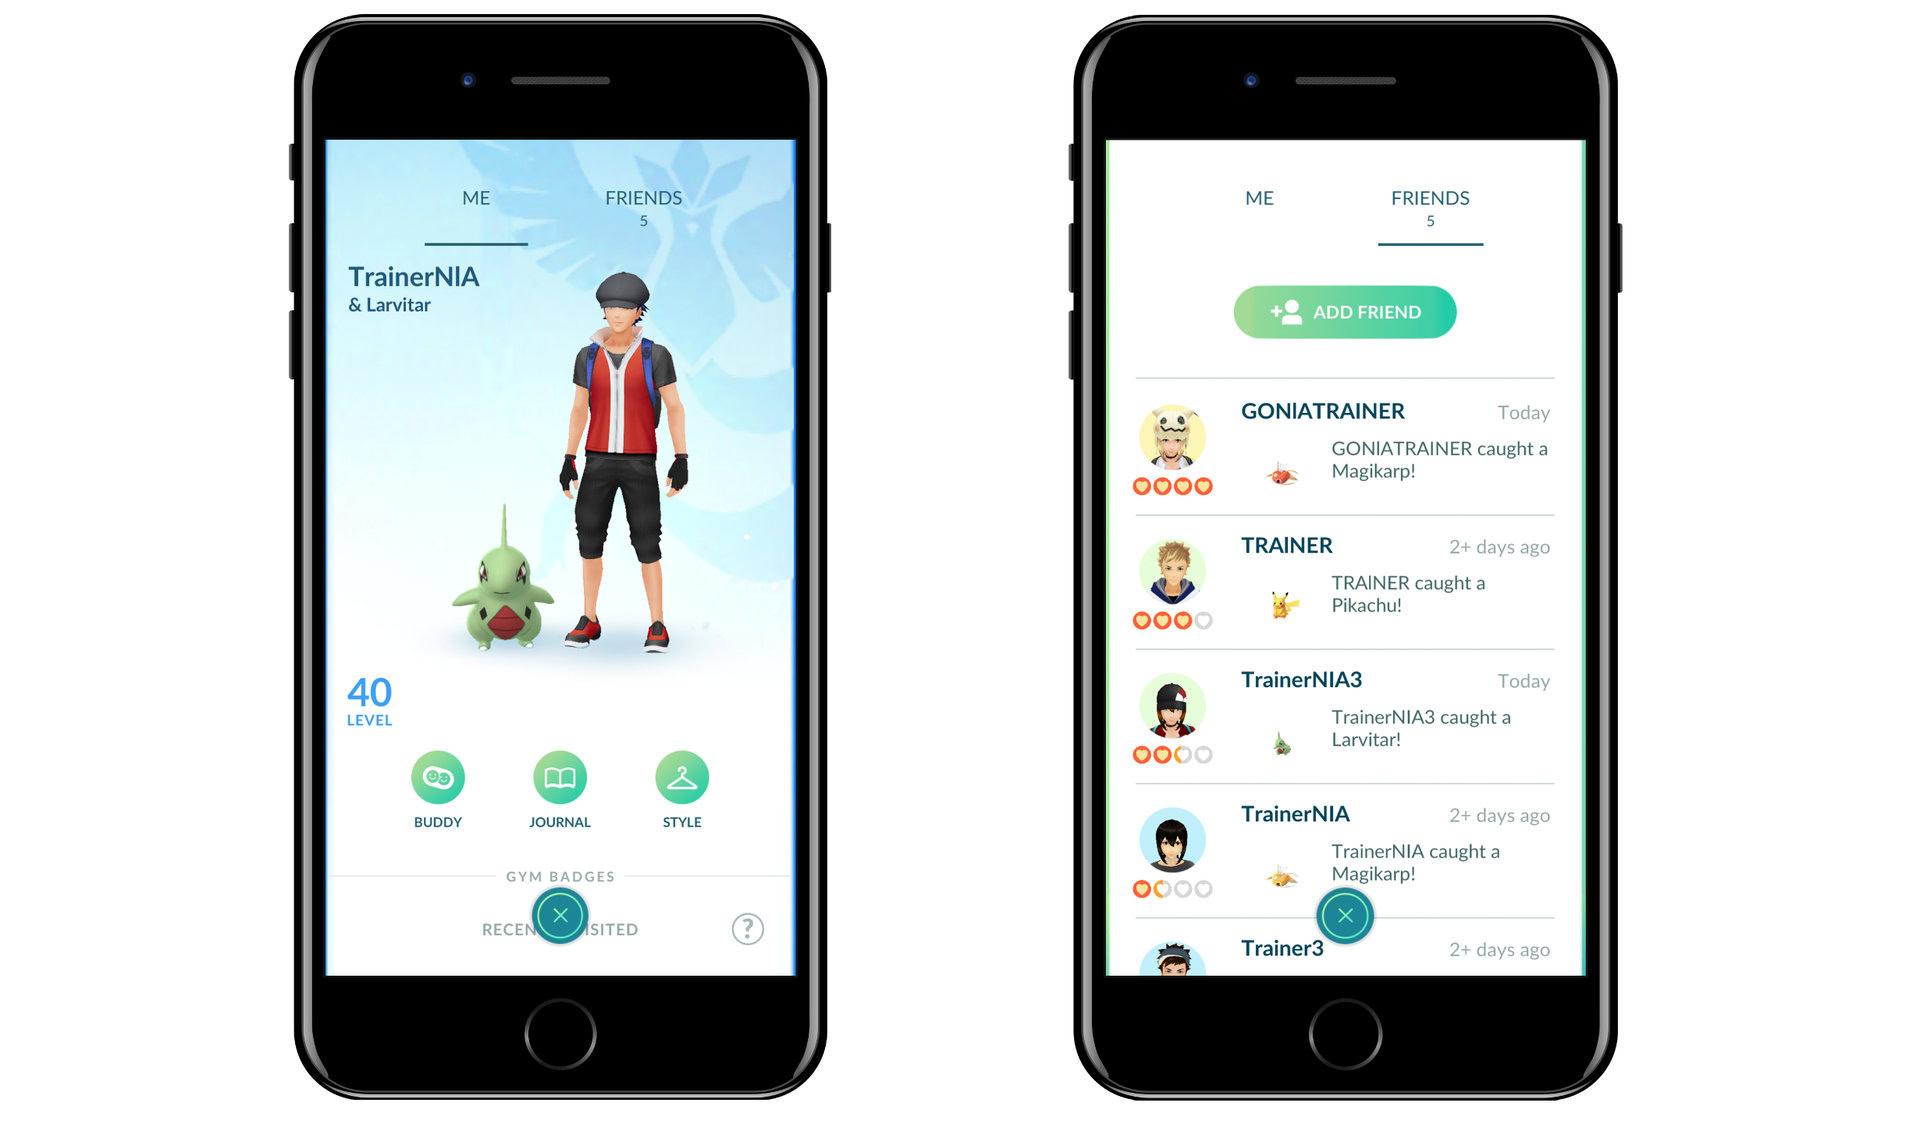 How to add friends in Pokémon Go and how to raise Friendship